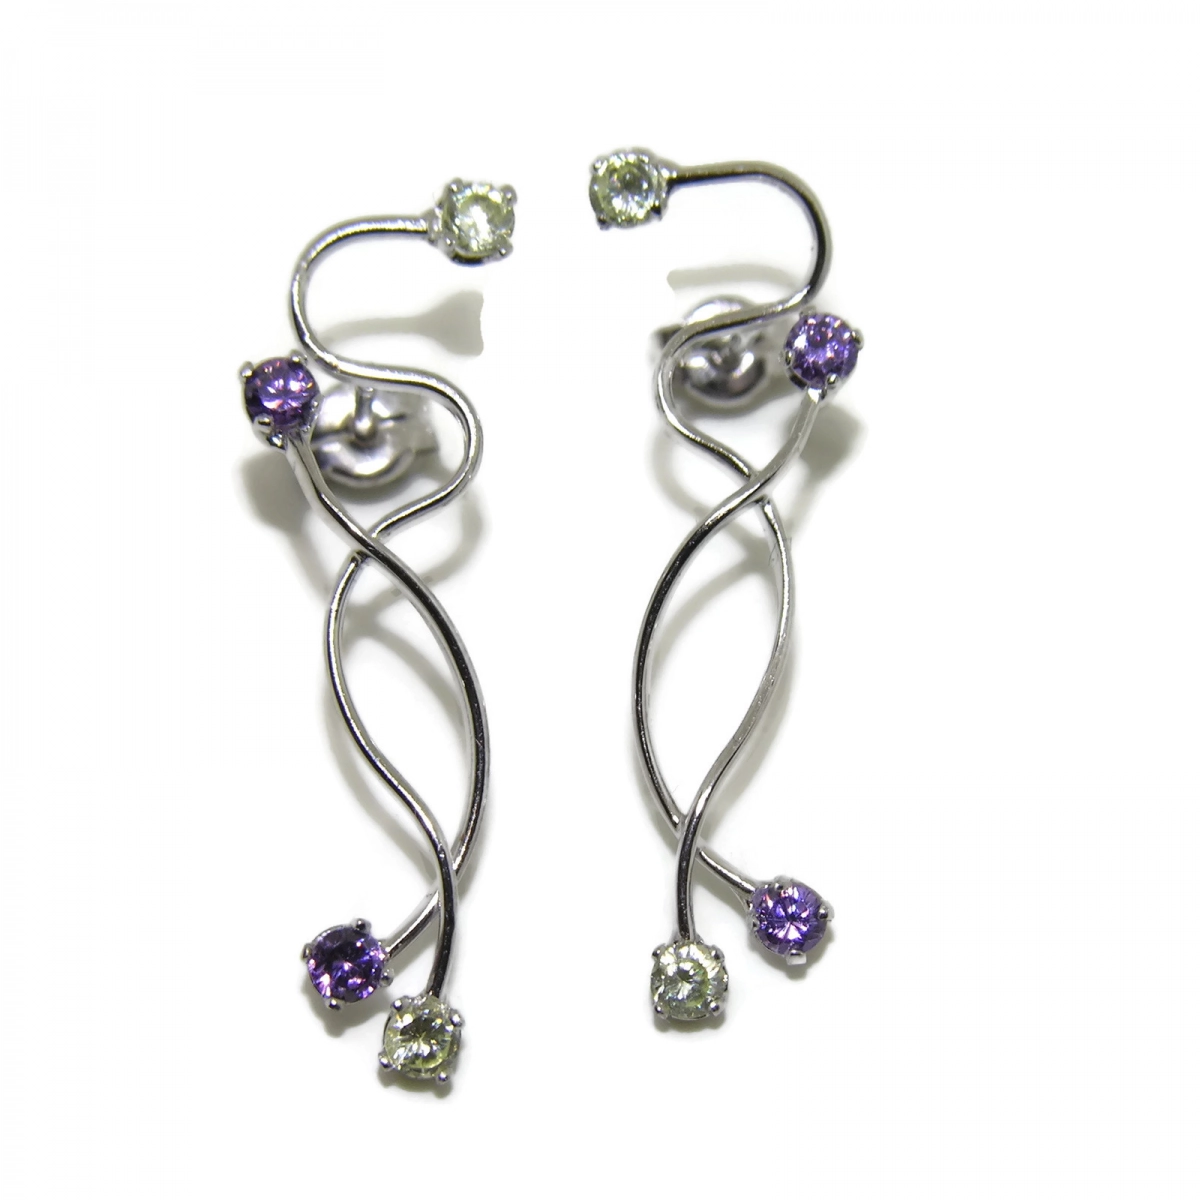 EARRINGS OF WHITE GOLD OF 18KTES AND FINE STONE COLOR. PRESSURE NEVER SAY NEVER